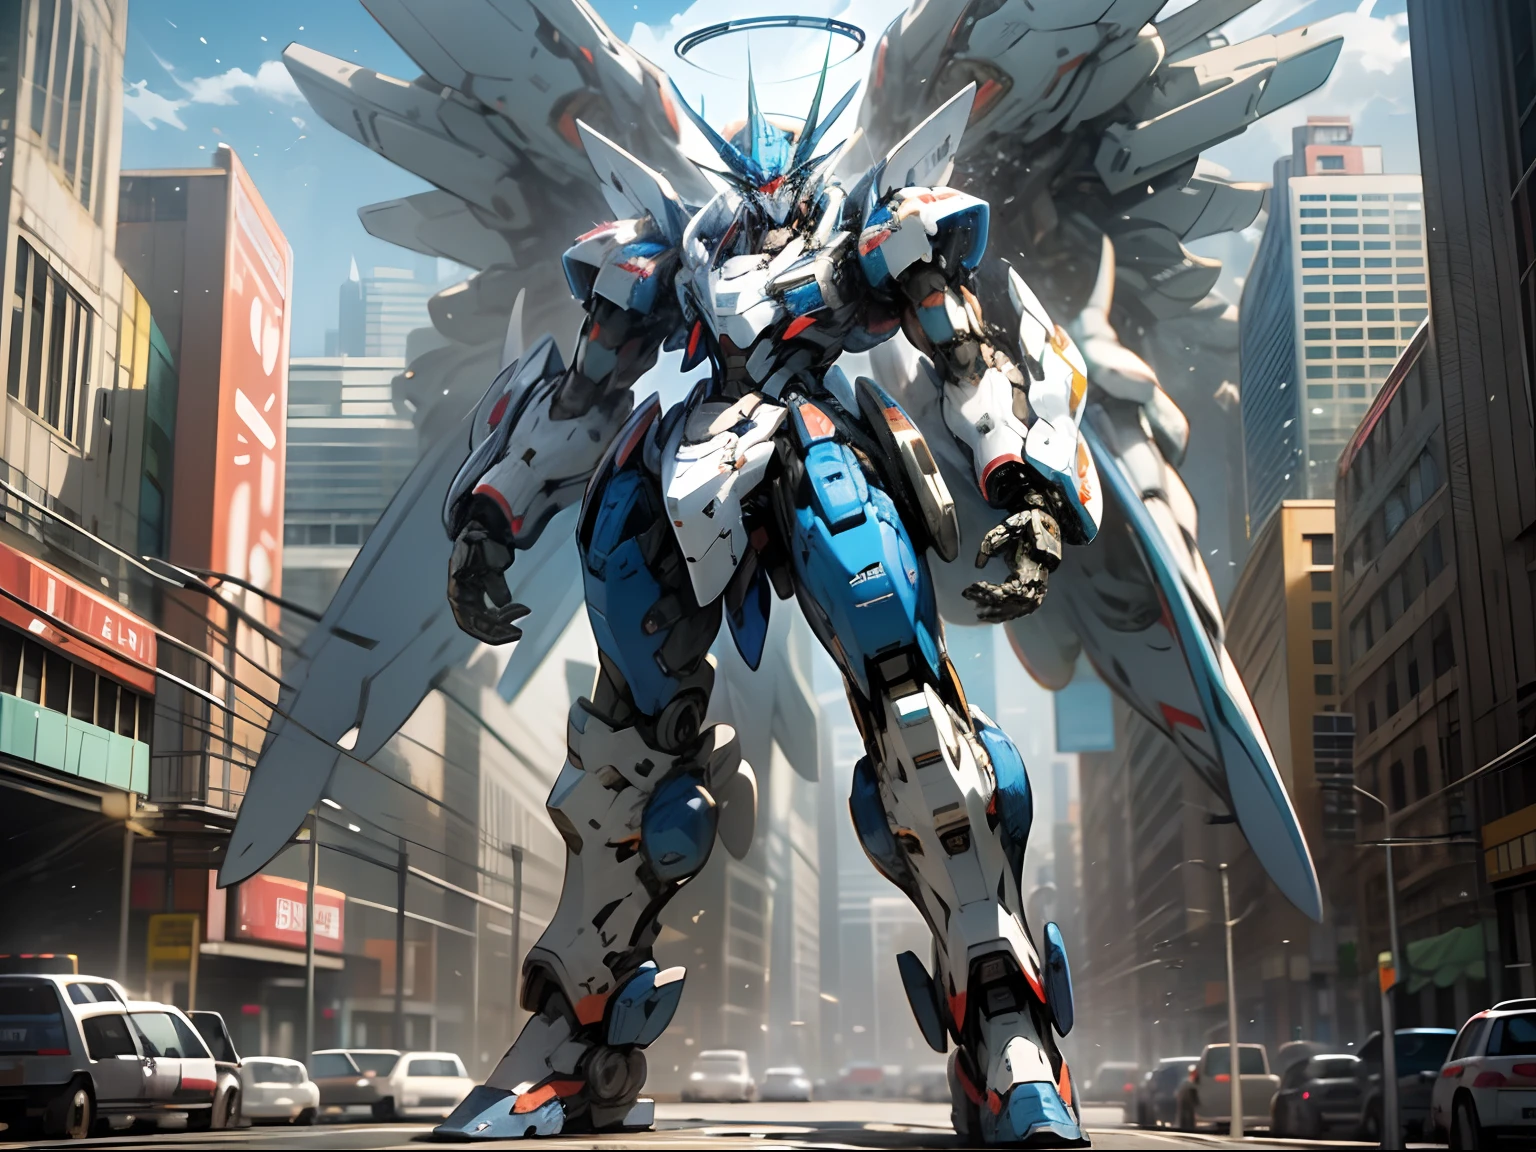 k hd、Best picture quality、ultra - detailed、Beautiful illustrations，Arape robot standing on a city street， Mecha suit, cool mecha style, anime large mecha robot, Full body mecha, mecha anime, Full body blue mech, Blue transparent mask，painterly humanoid mecha, Alexander Ferra Mecha, modern mecha anime, Blue mech, japanese mecha, full body mecha suit，Metal wings，The halo behind it